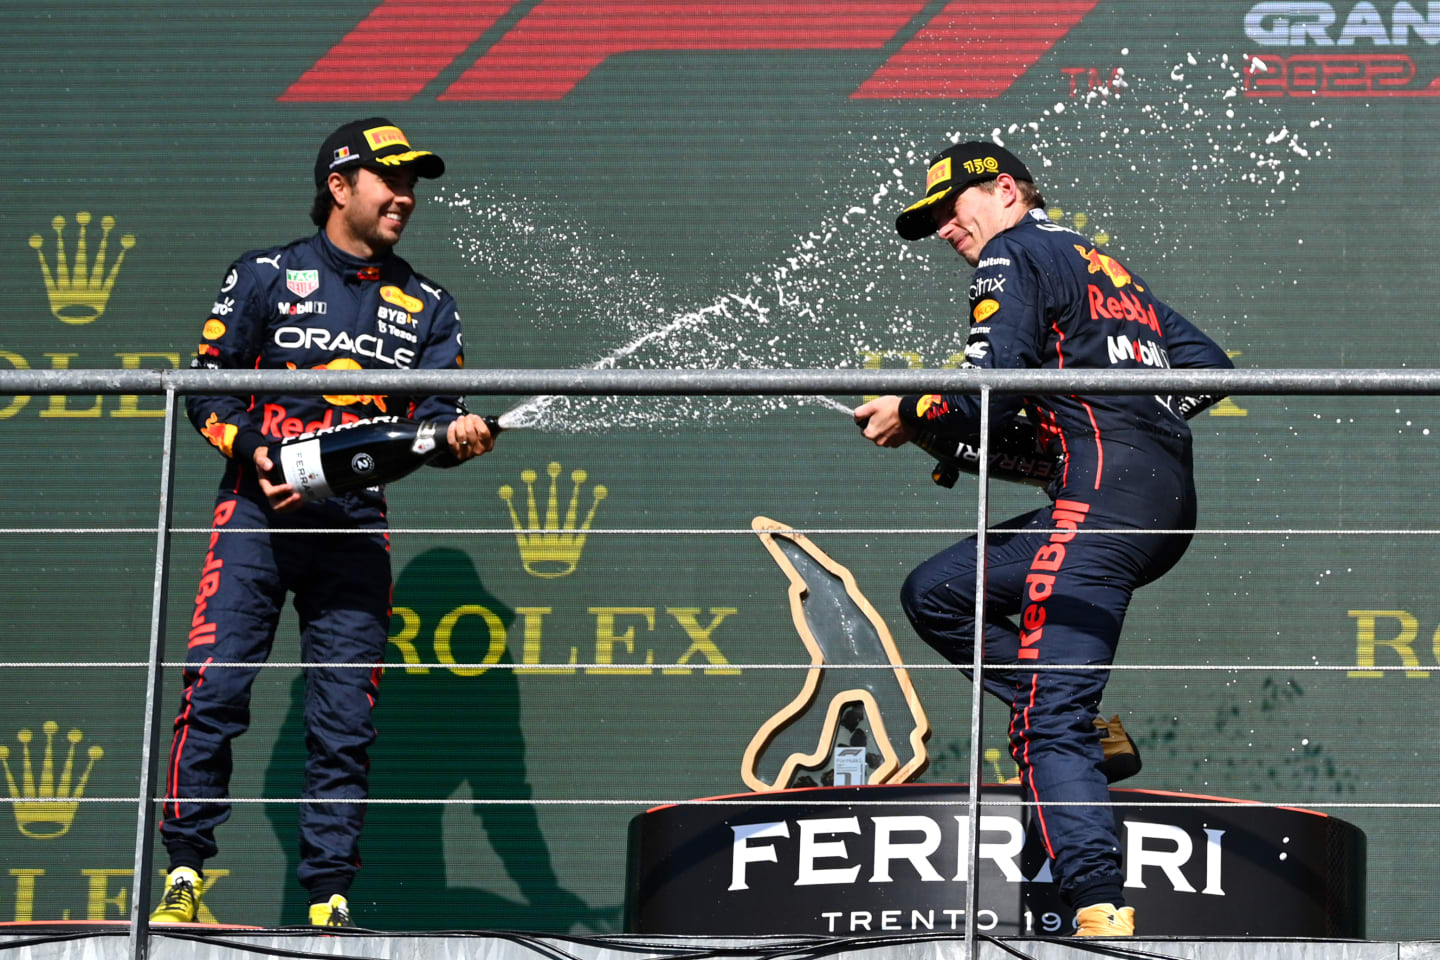 SPA, BELGIUM - AUGUST 28: Race winner Max Verstappen of the Netherlands and Oracle Red Bull Racing and Second placed Sergio Perez of Mexico and Oracle Red Bull Racing celebrate on the podium during the F1 Grand Prix of Belgium at Circuit de Spa-Francorchamps on August 28, 2022 in Spa, Belgium. (Photo by Dan Mullan/Getty Images)